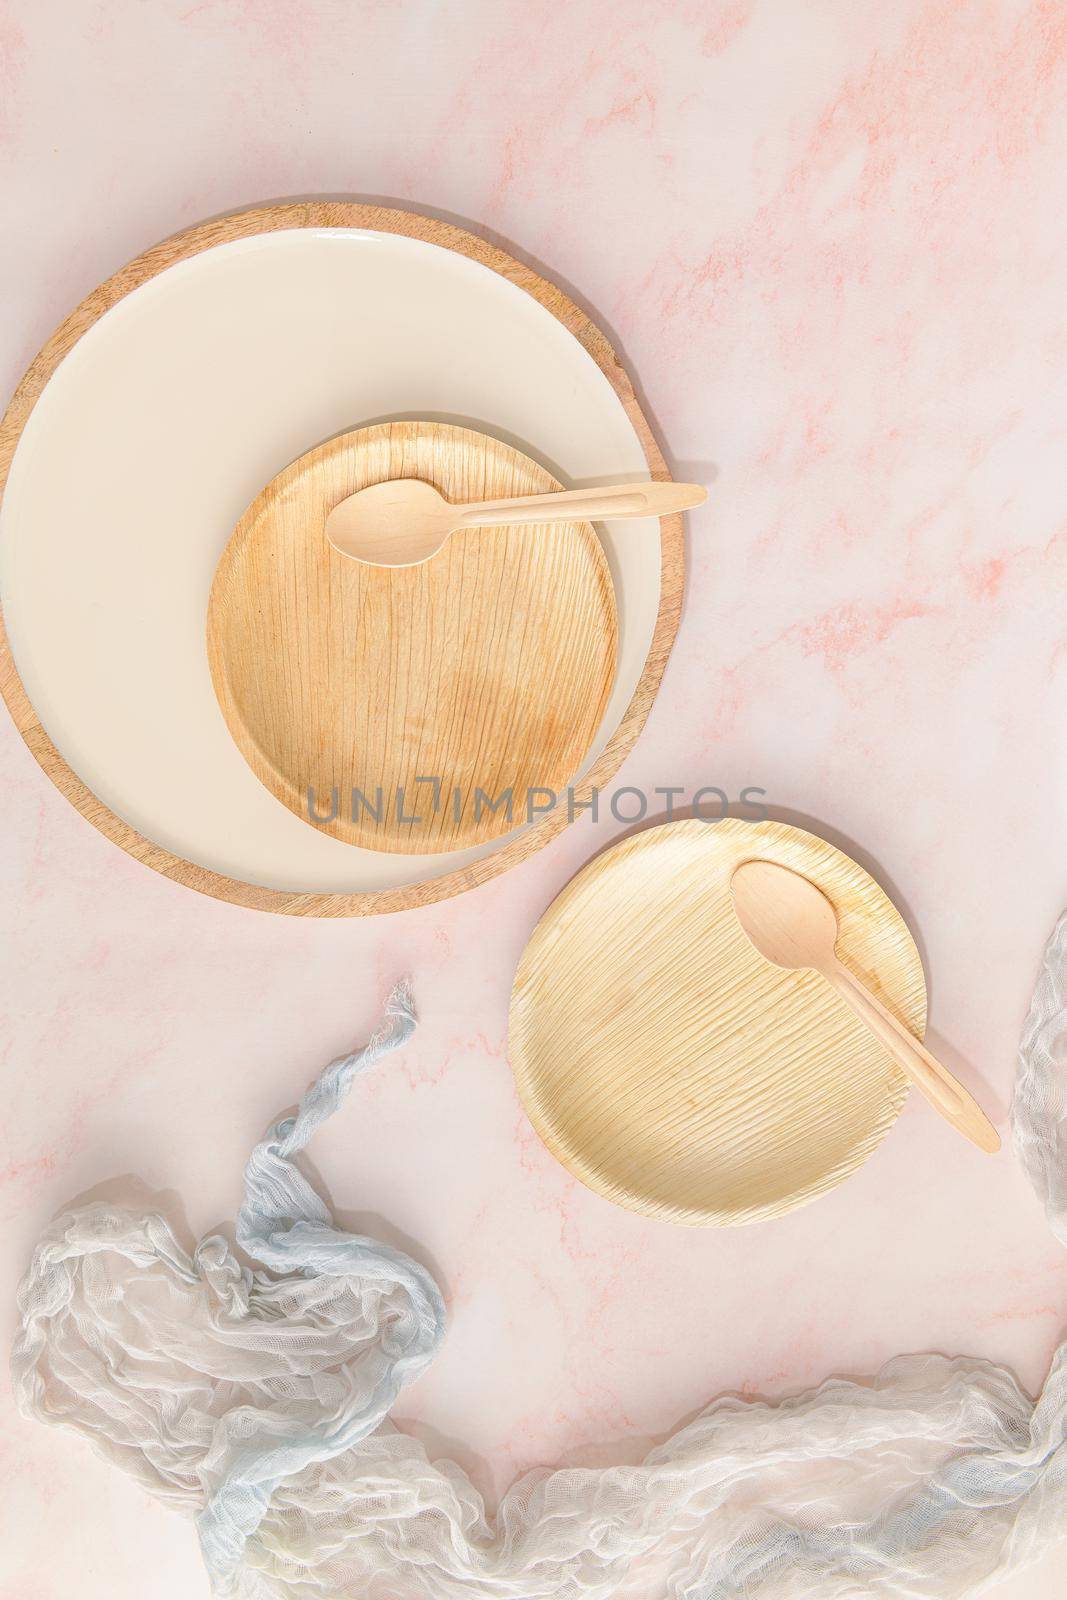 Areca leaf plates with recyclable spoons on a pink marble kitchen counter. Healthy food concept with environmental sustainability concerns.